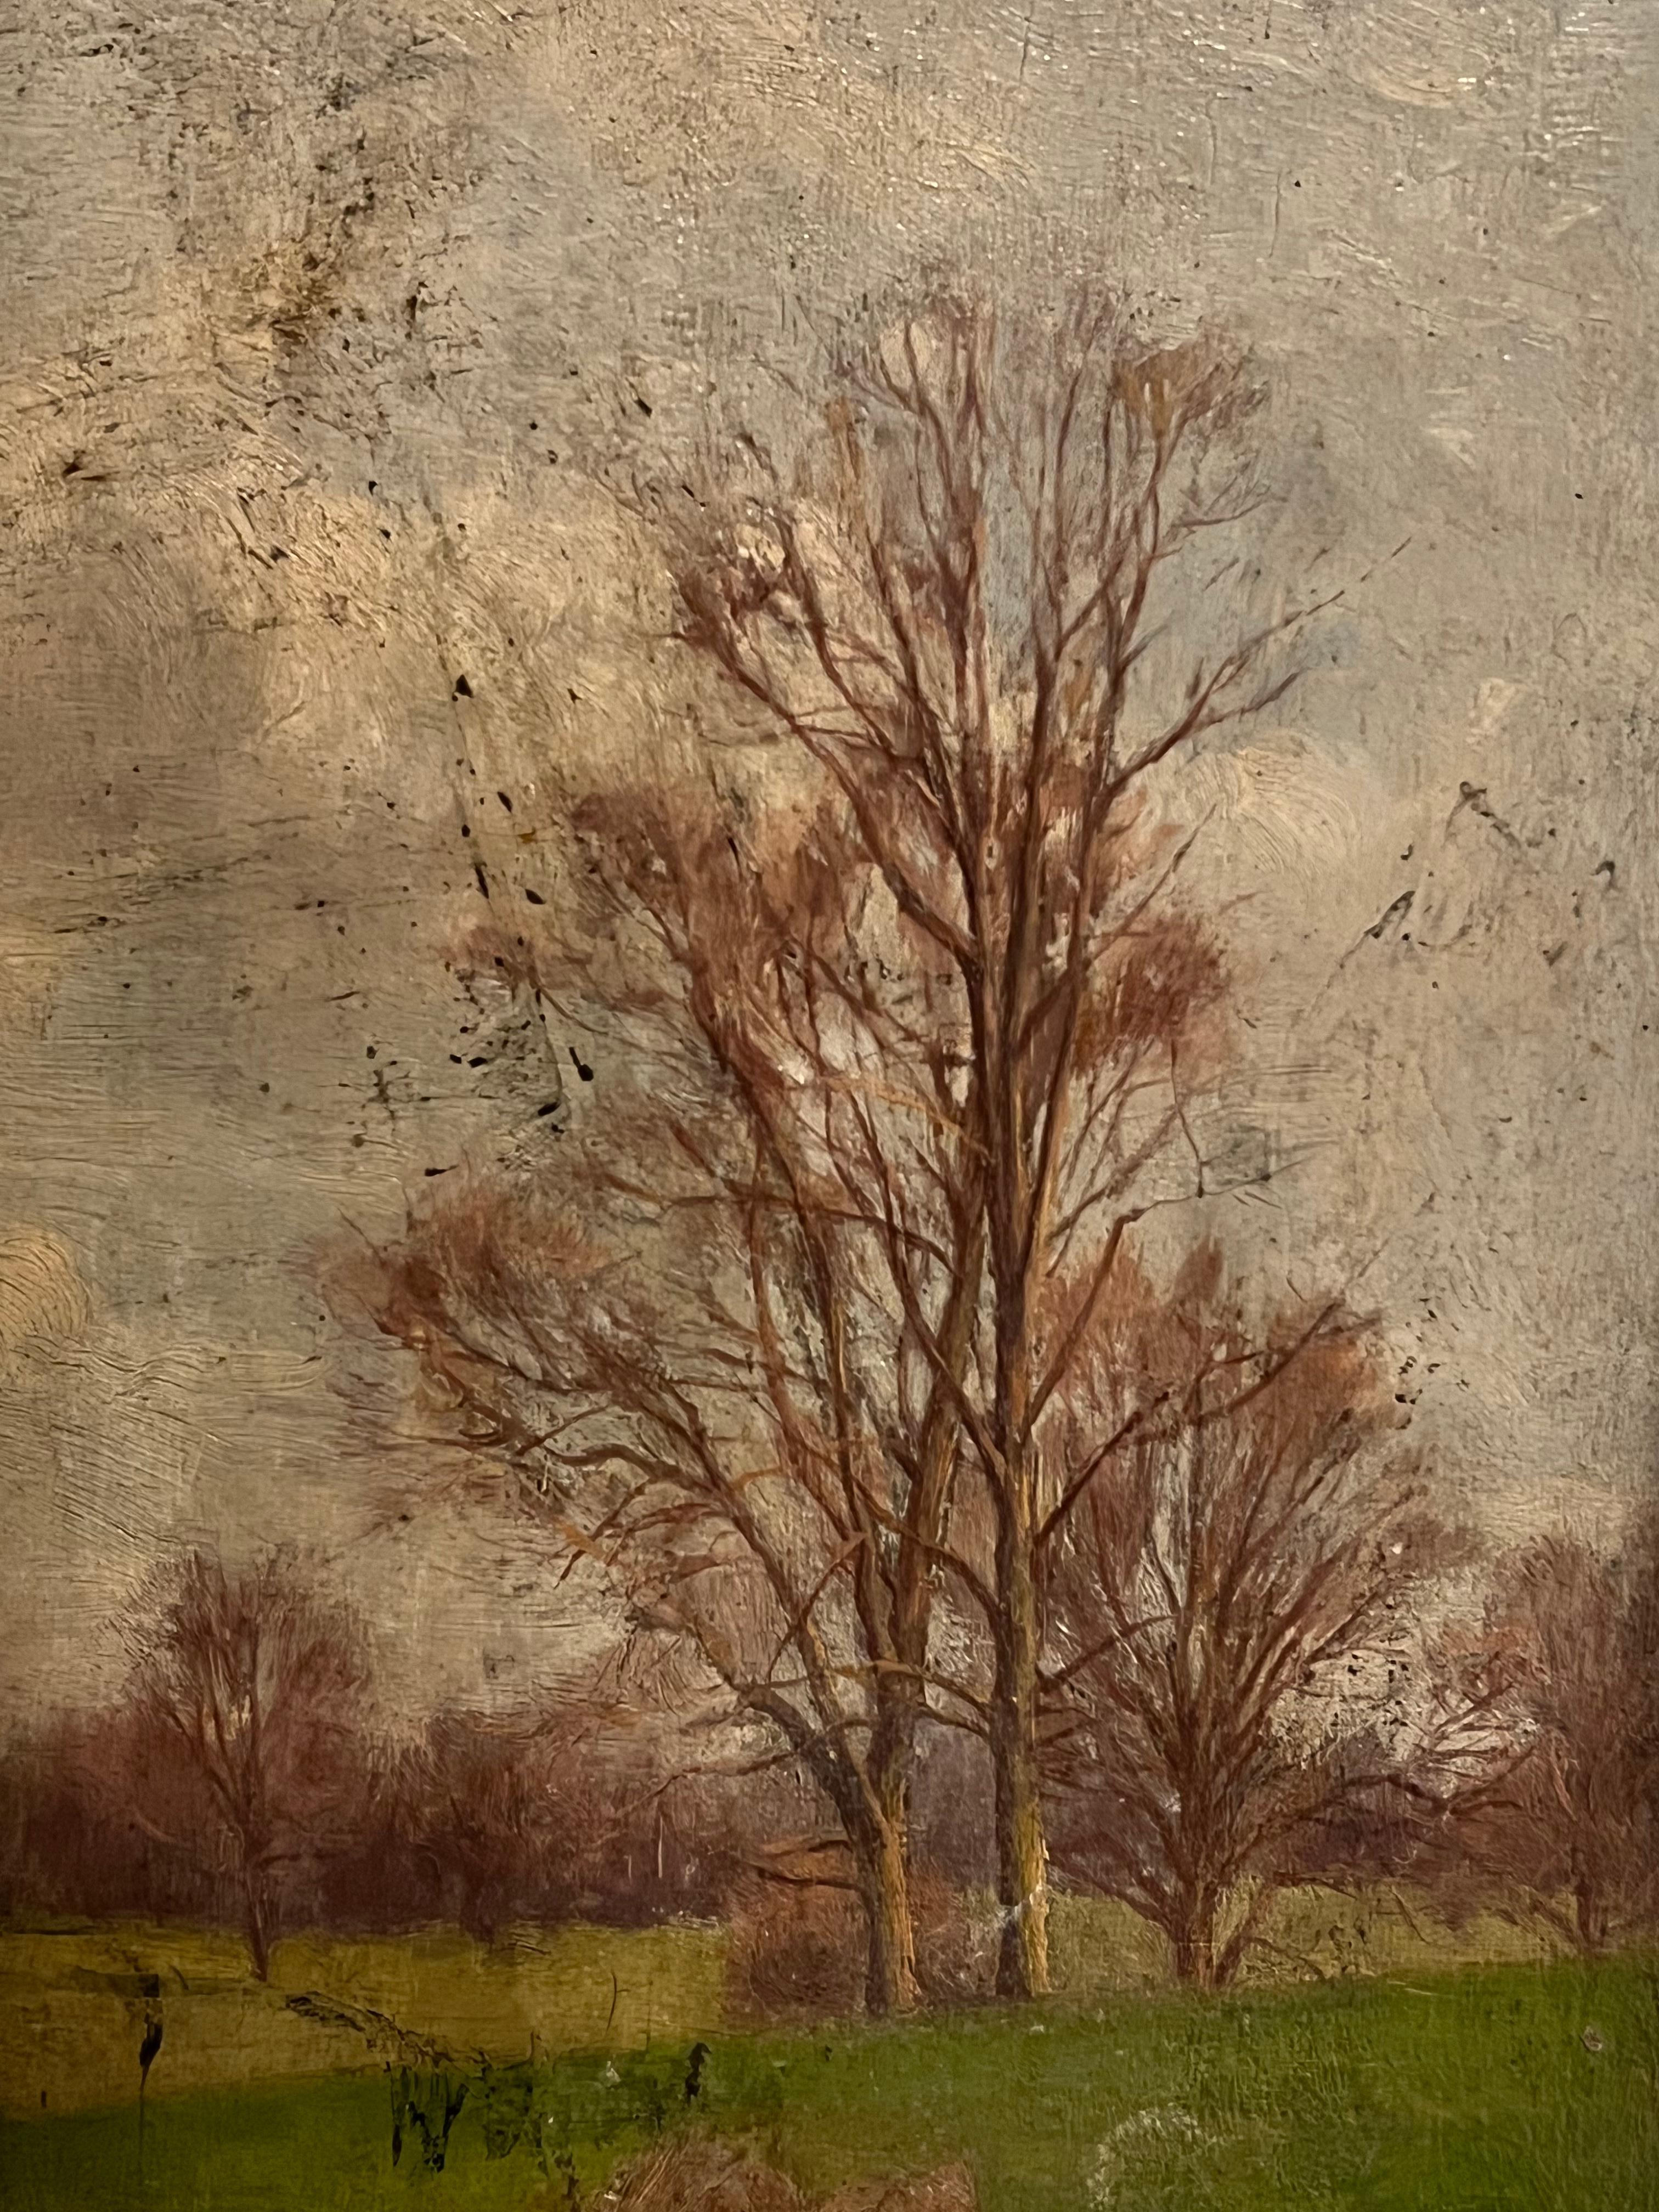 Artist/ School: English School, late 19th/ early 20th century.
The painting came from a large collection of works by one artist. A very few of them are signed what looks to be 'F. Wardle'. 

Title: Autumn Tree Landscape

Medium: oil on board,